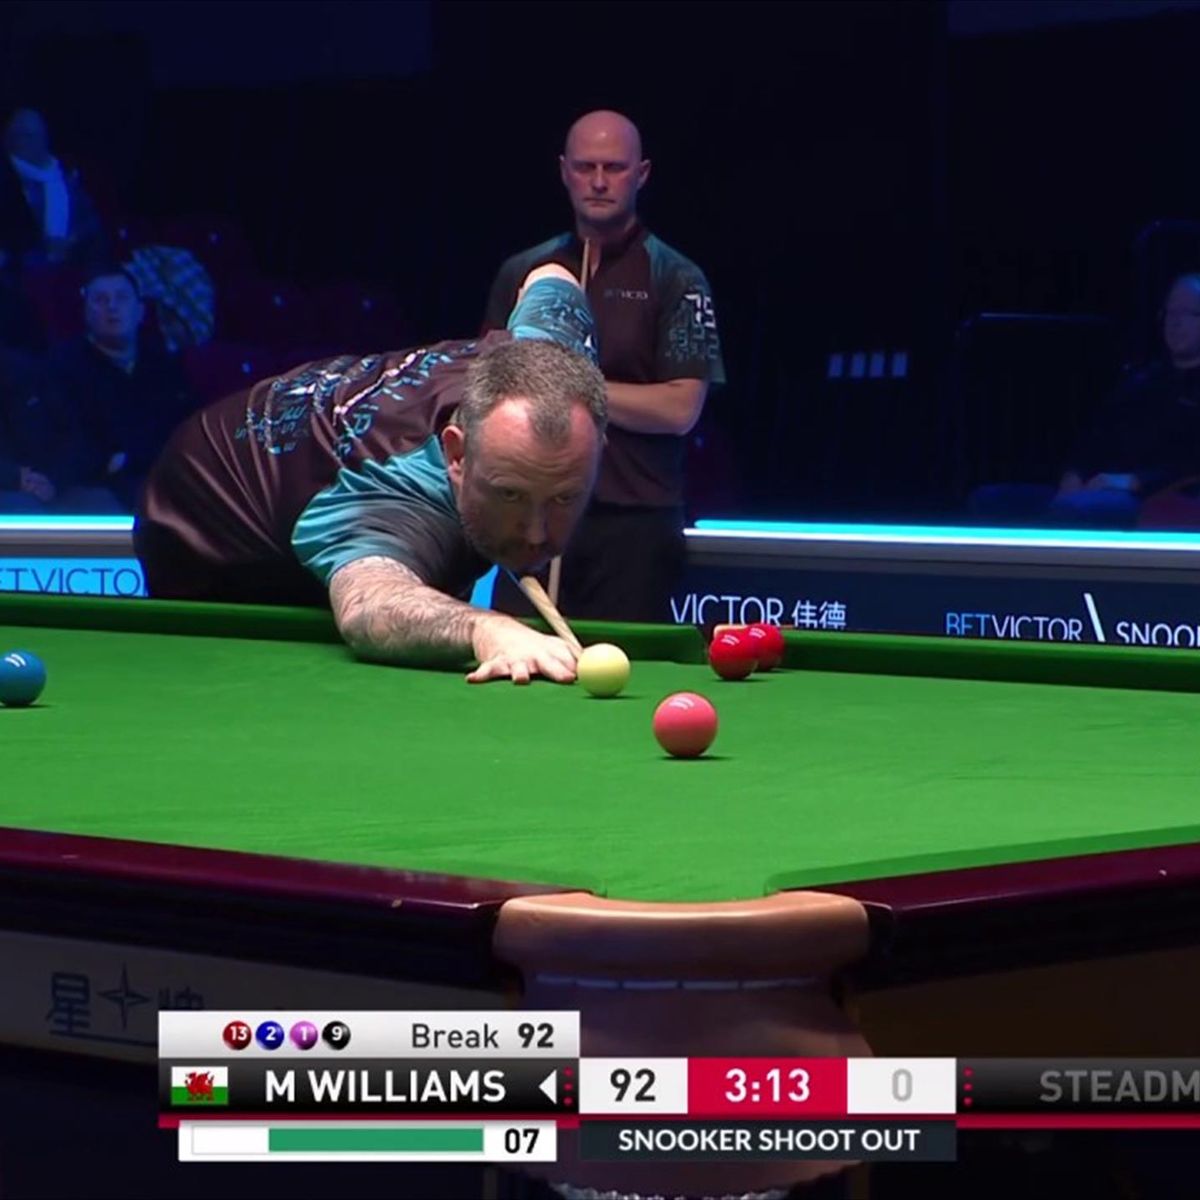 Mark Williams knocks off 98 for best break of the day at Snooker Shoot Out - Snooker video